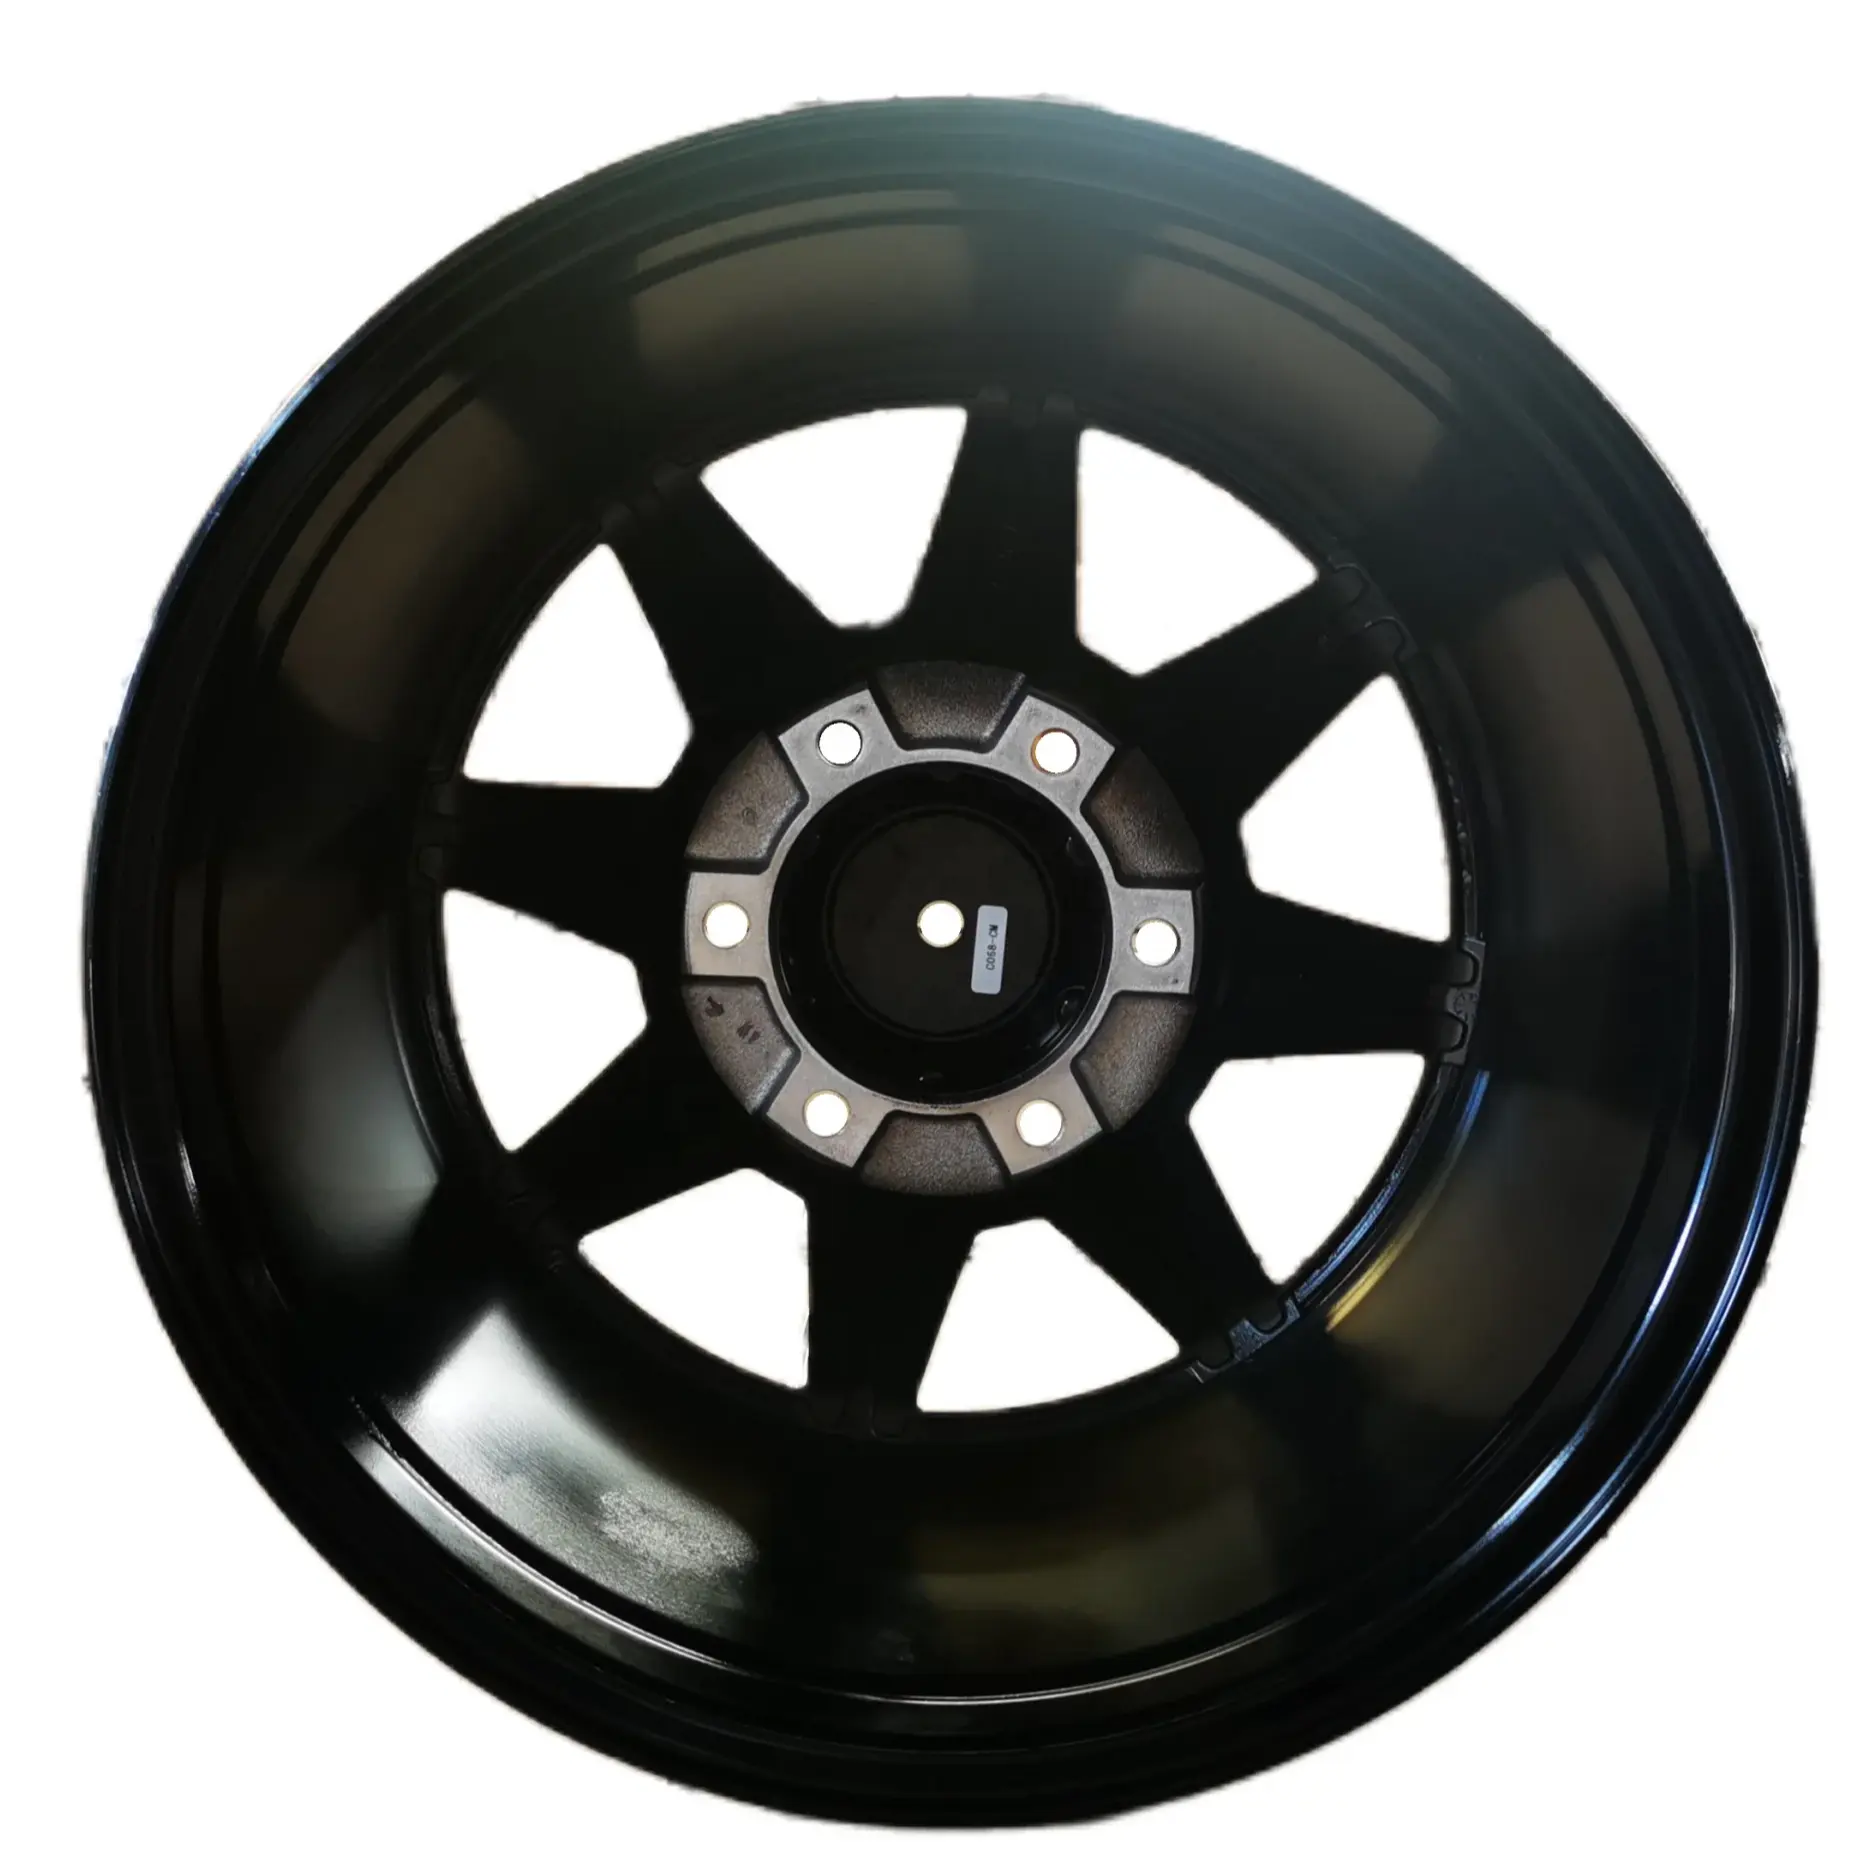 alloy wheel tyres 6 holes 6X139.7 matte black milling words and rivets 17x9 high quality fit for passenger car wheels